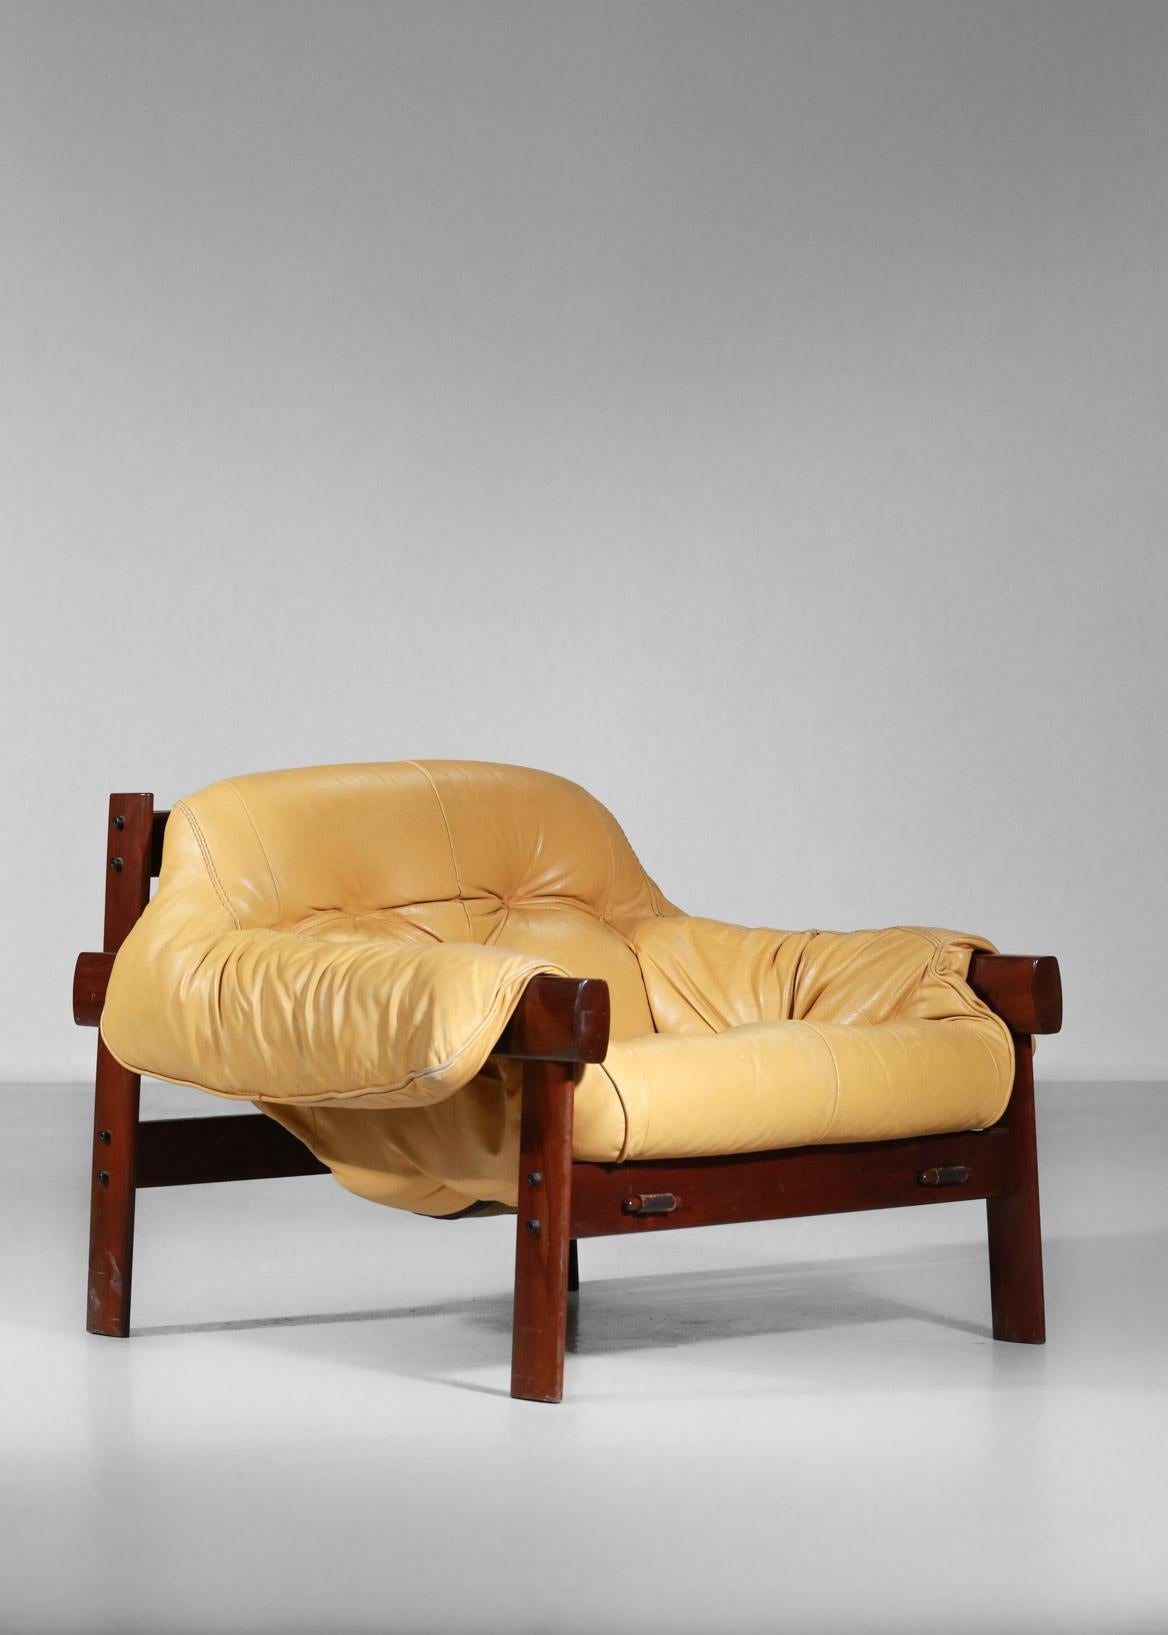 Armchair by designer Percival Lafer created in the 1960s.
Solid Jacaranda structure and leather straps.
Sand yellow leather seat.
Removable headrest available (see pictures).
The total height with the headrest is 88 centimetres and the seat